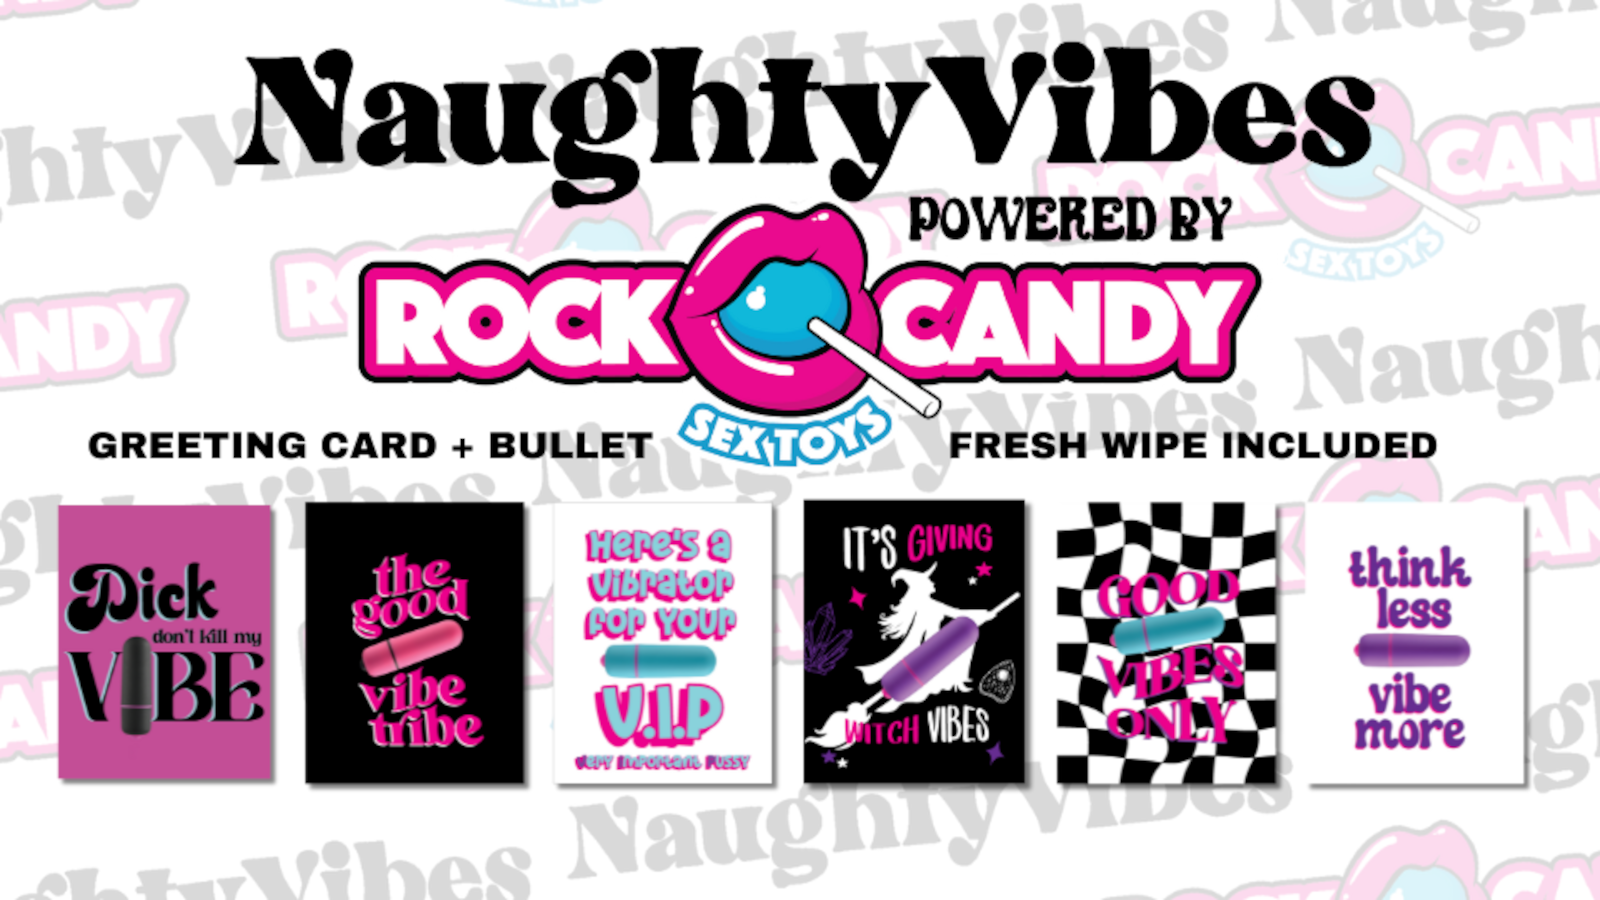 KushKards, Rock Candy Toys Team Up for Product Collaboration